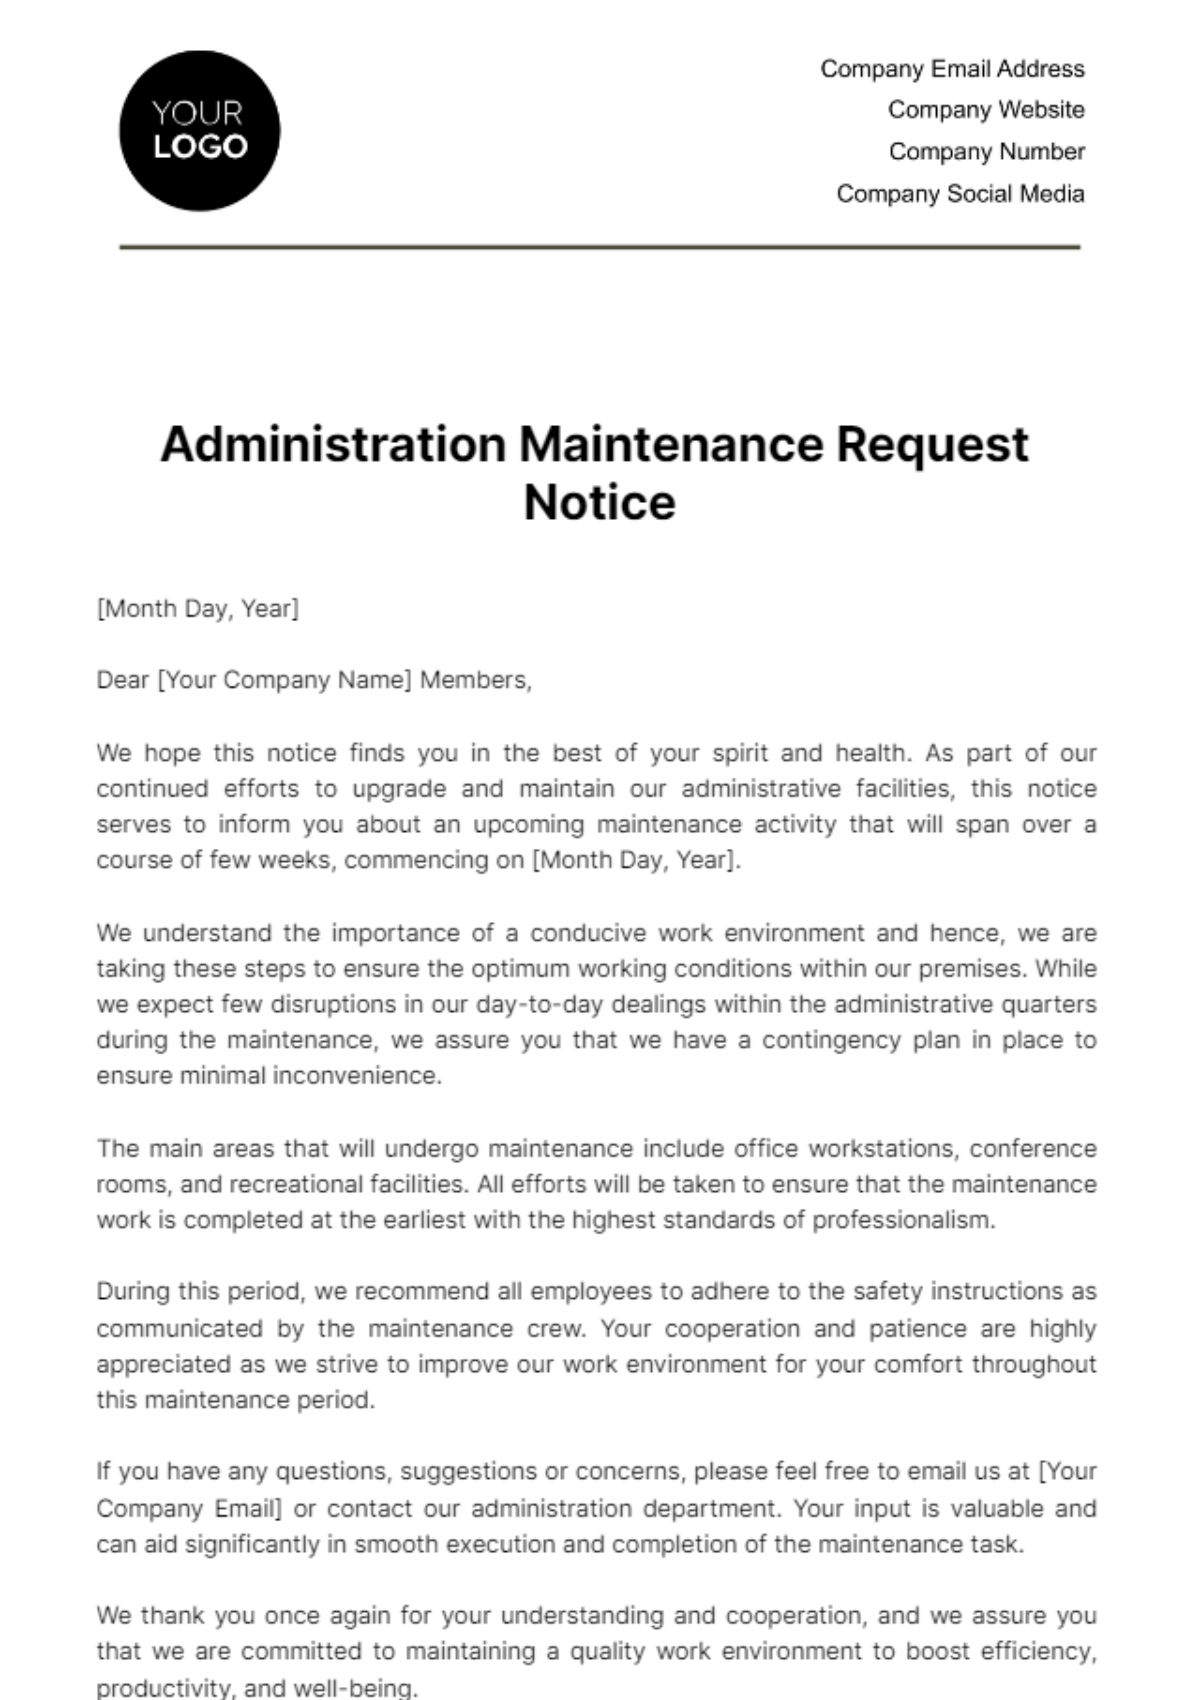 Free Administration Maintenance Request Notice Template